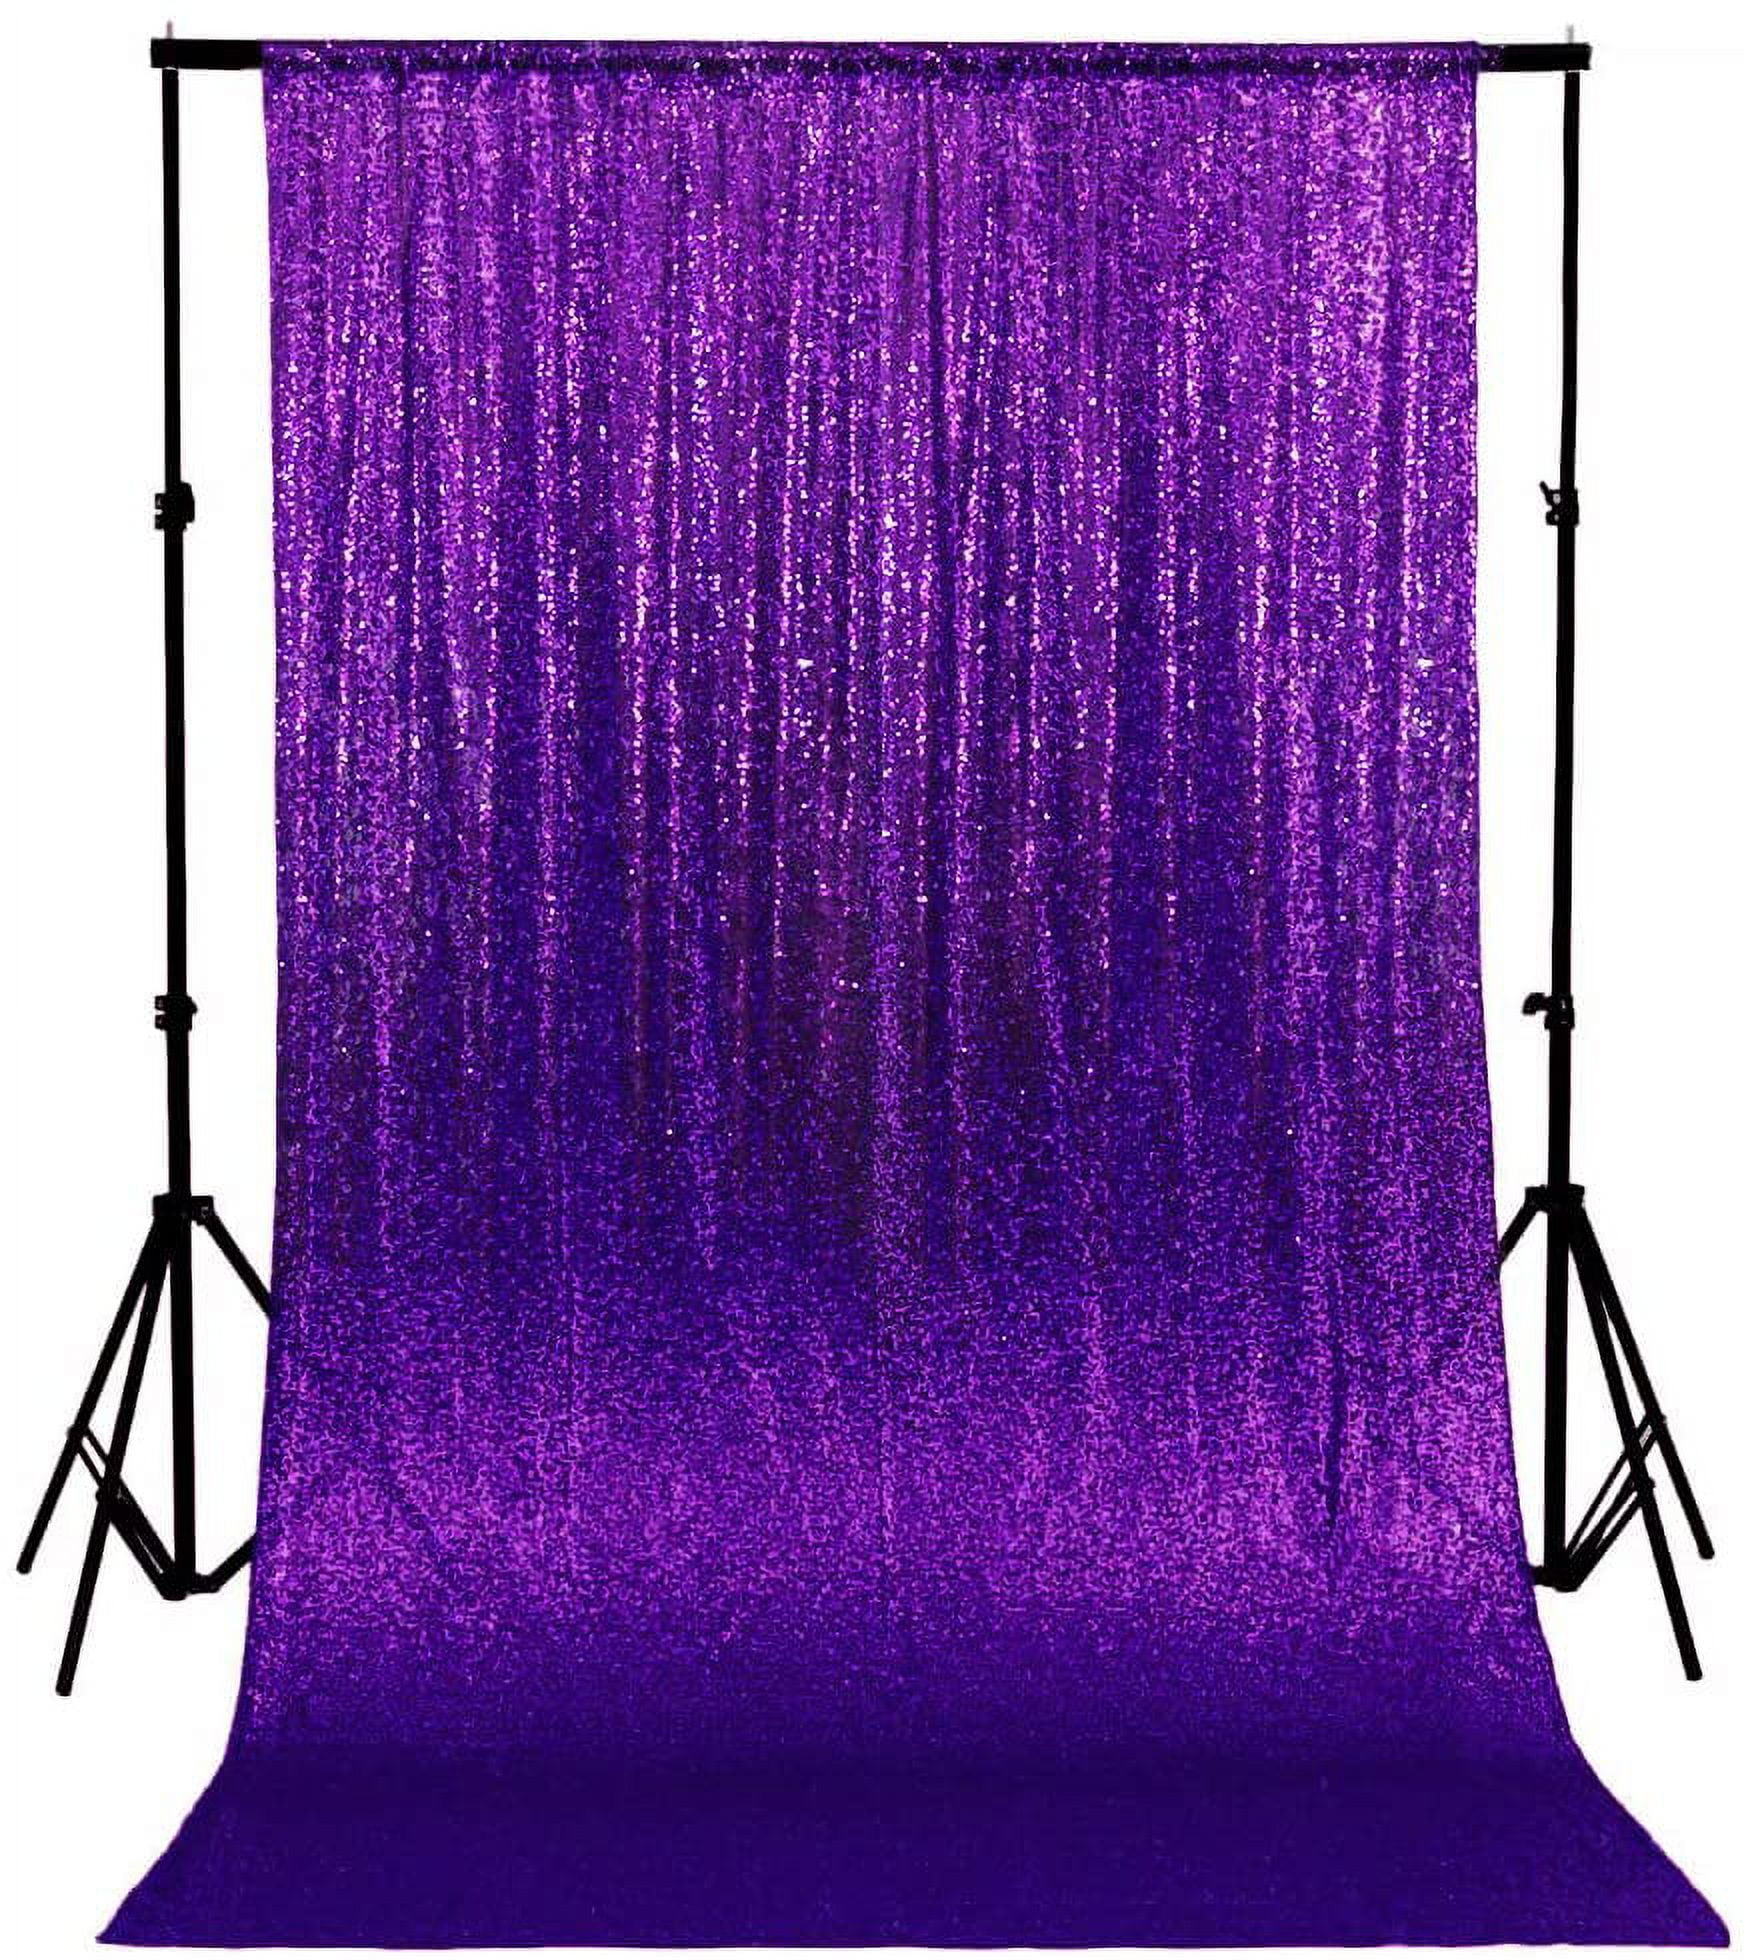 5ft x 6ft RED Sequin Taffeta Fabric Photography Backdrop, Sequin